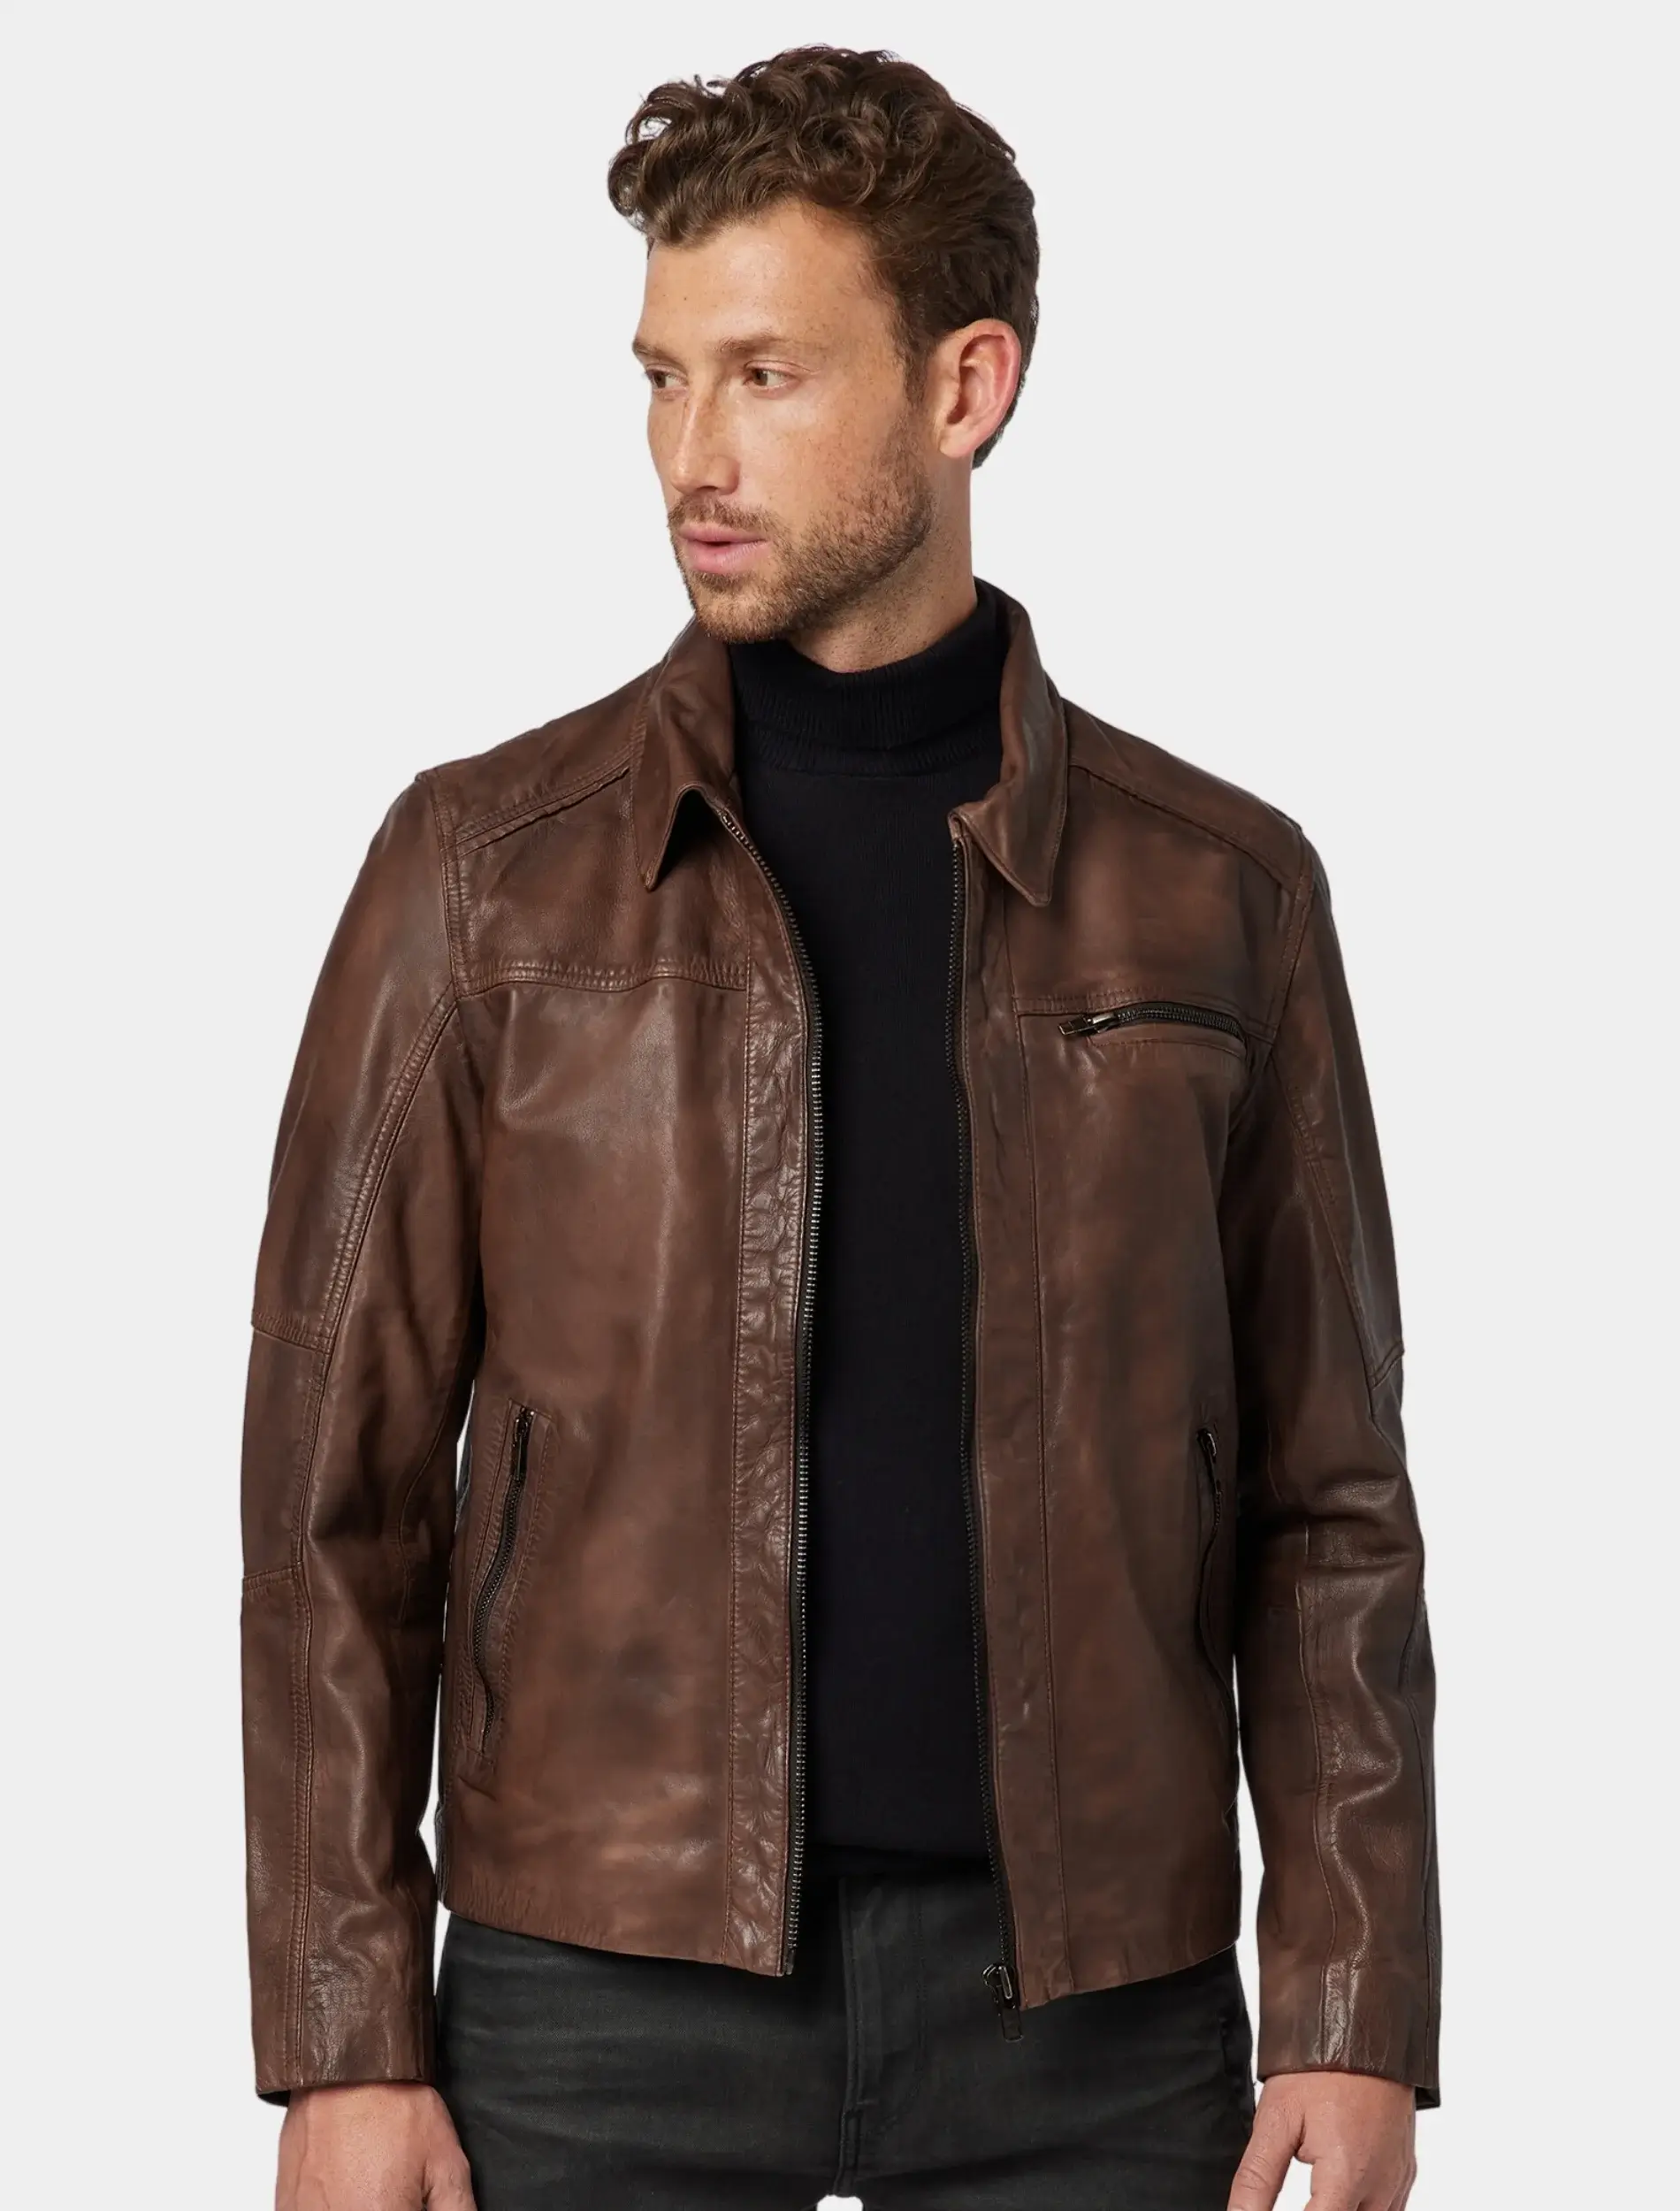 Mens Classic Brown Leather Trucker Jacket